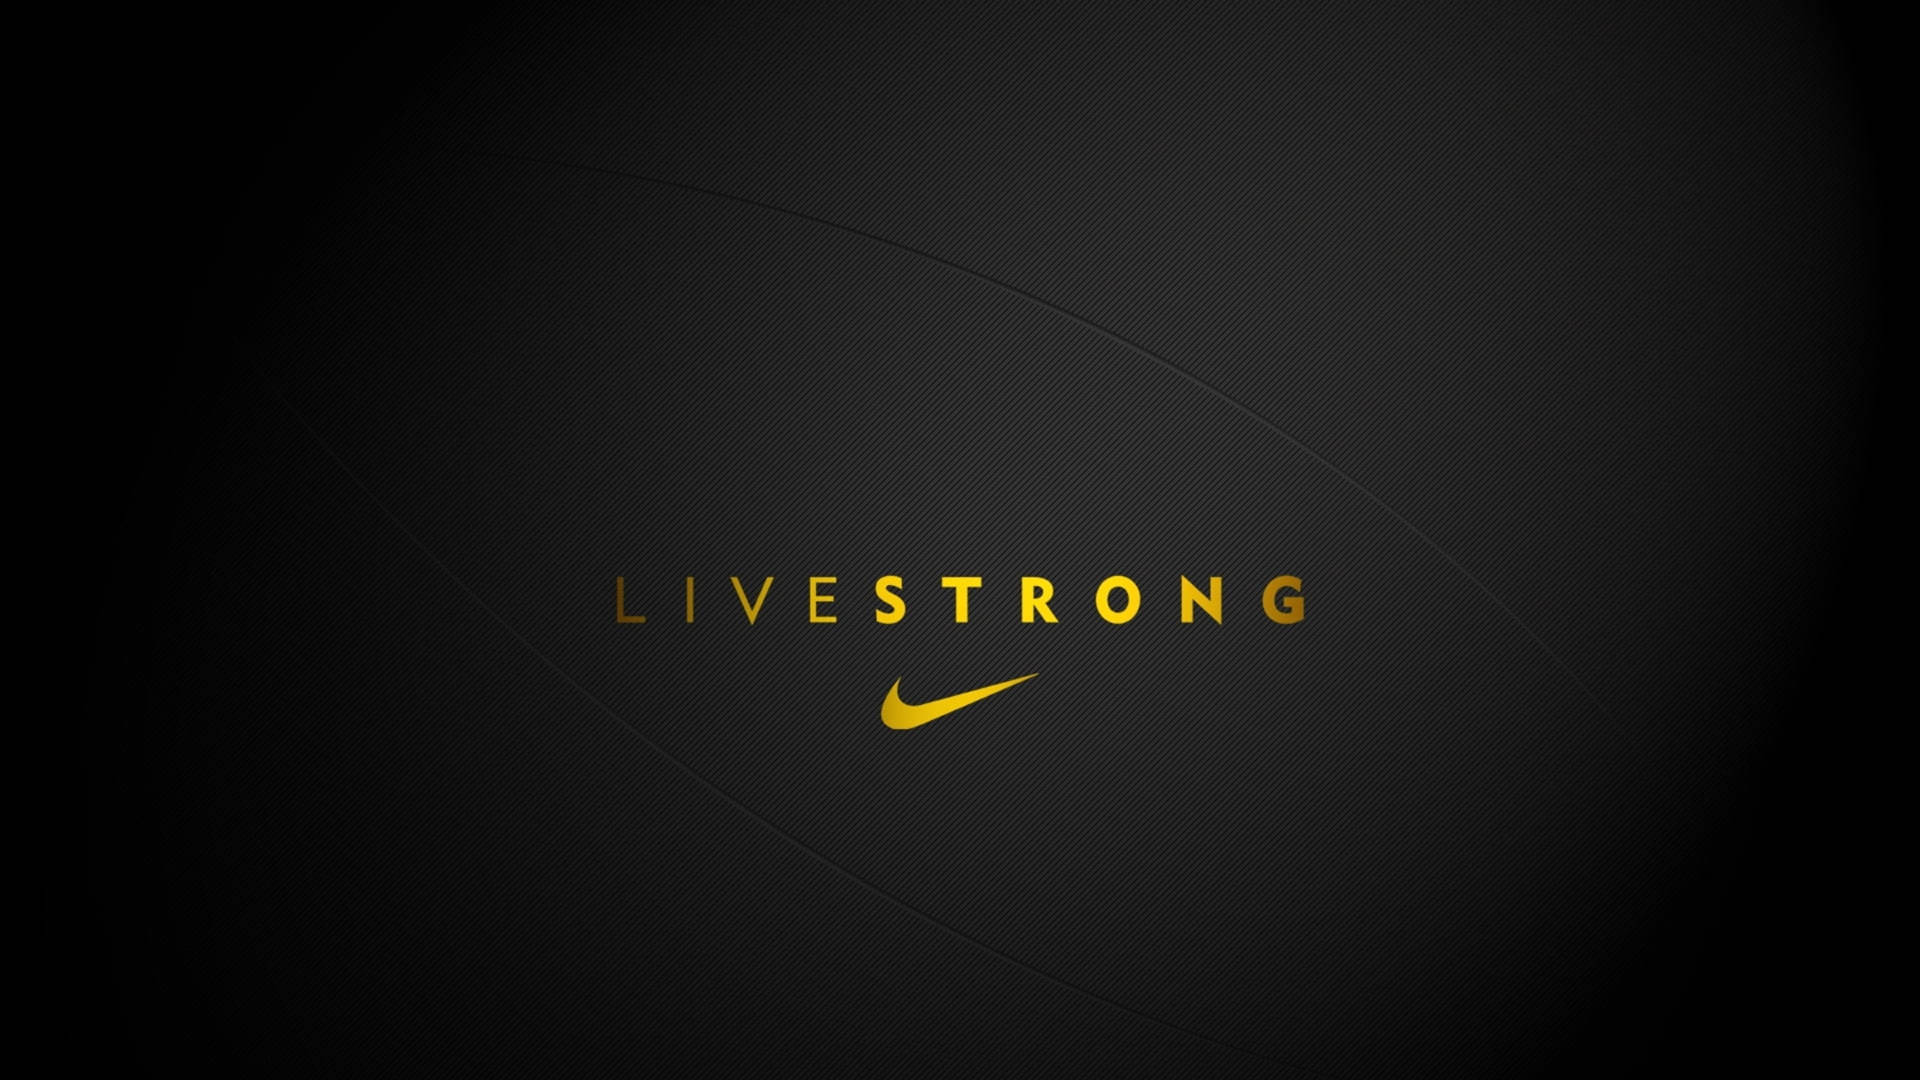 Black And Gold Nike Live Strong Background